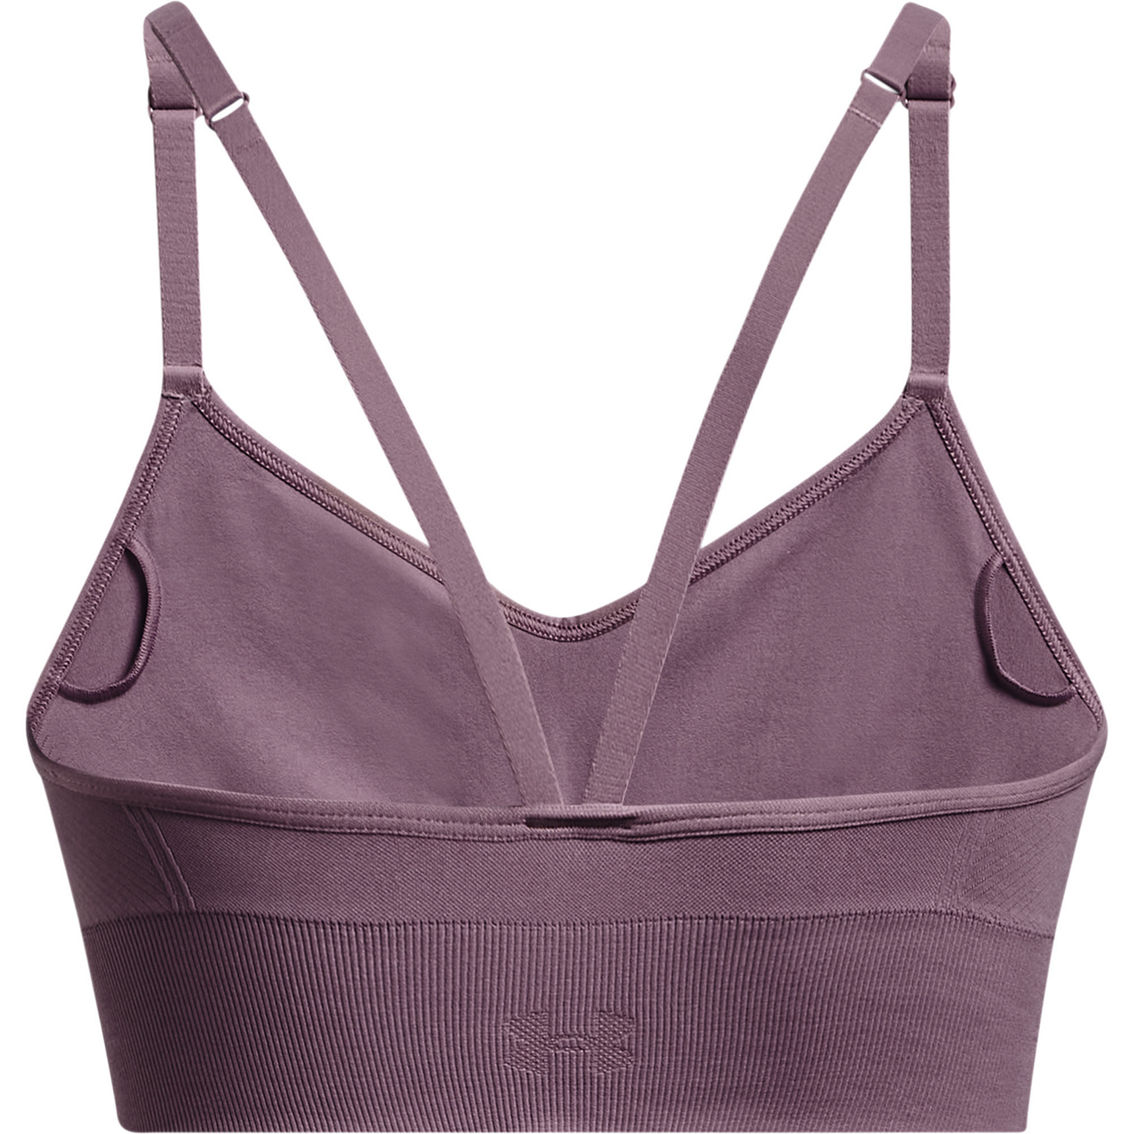 Under Armour Train Seamless Low Sports Bra - Image 6 of 6